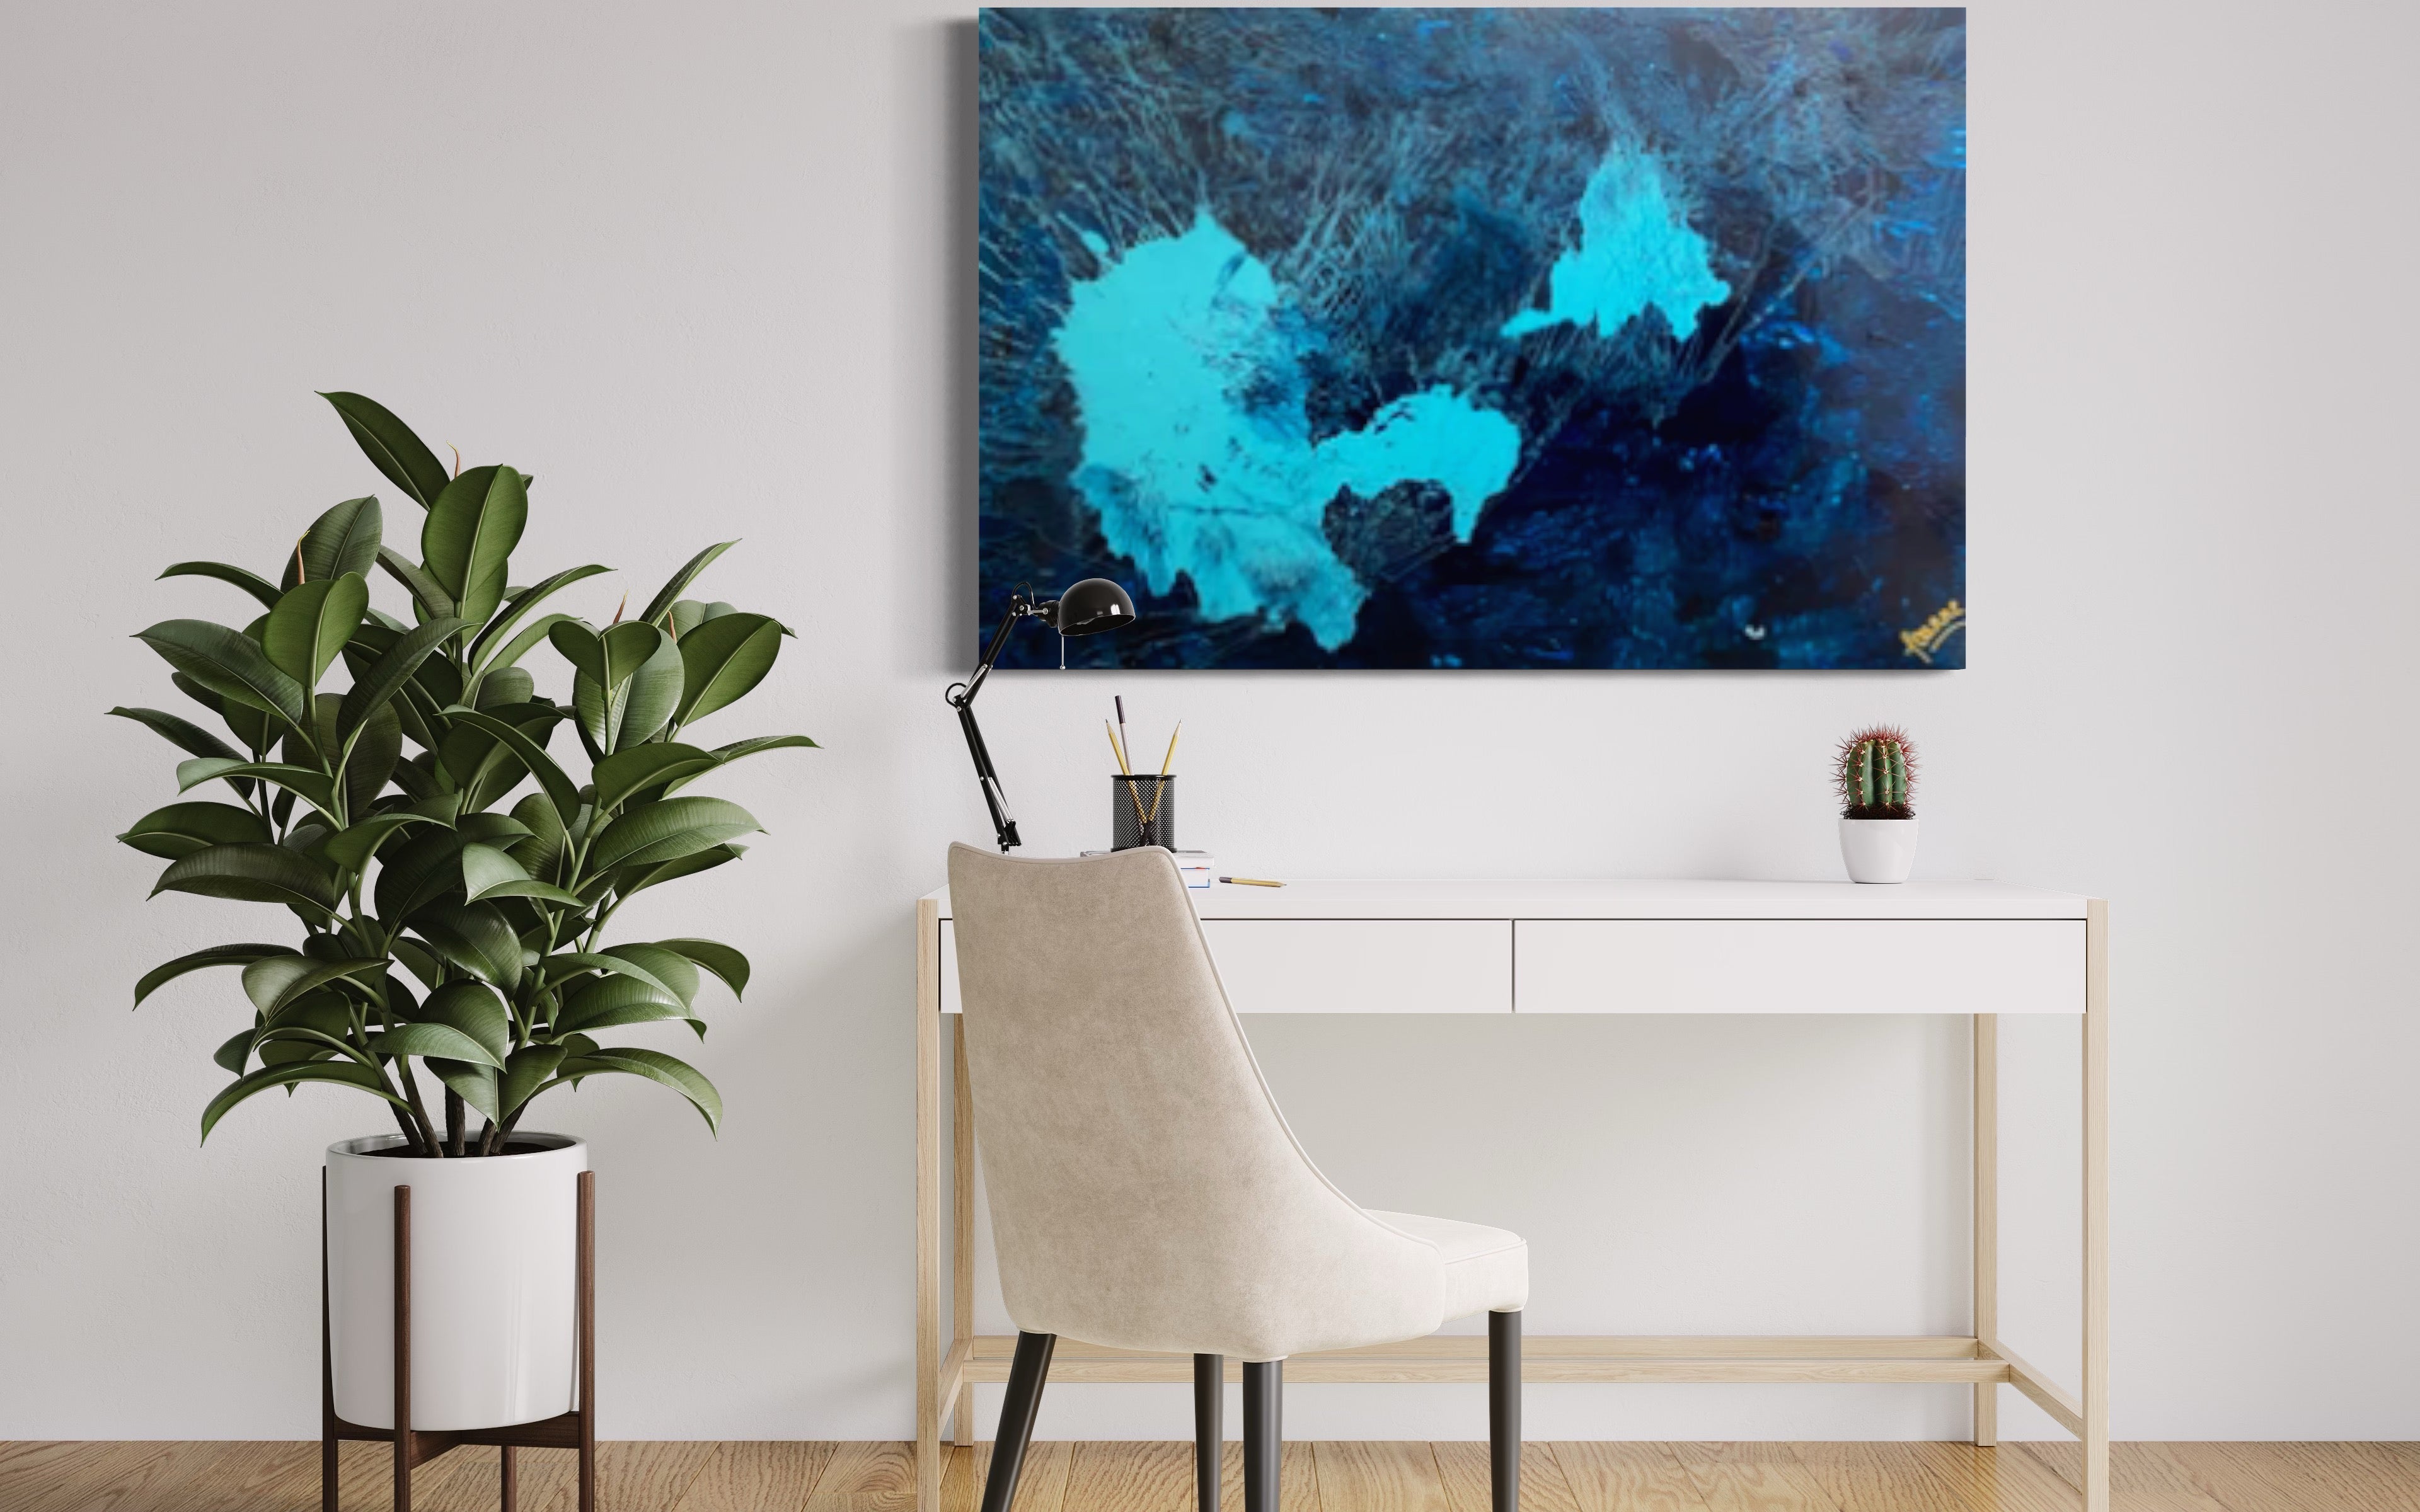 Emerald Blue Sea 93 cm x 61 cm Blue Textured Abstract Painting